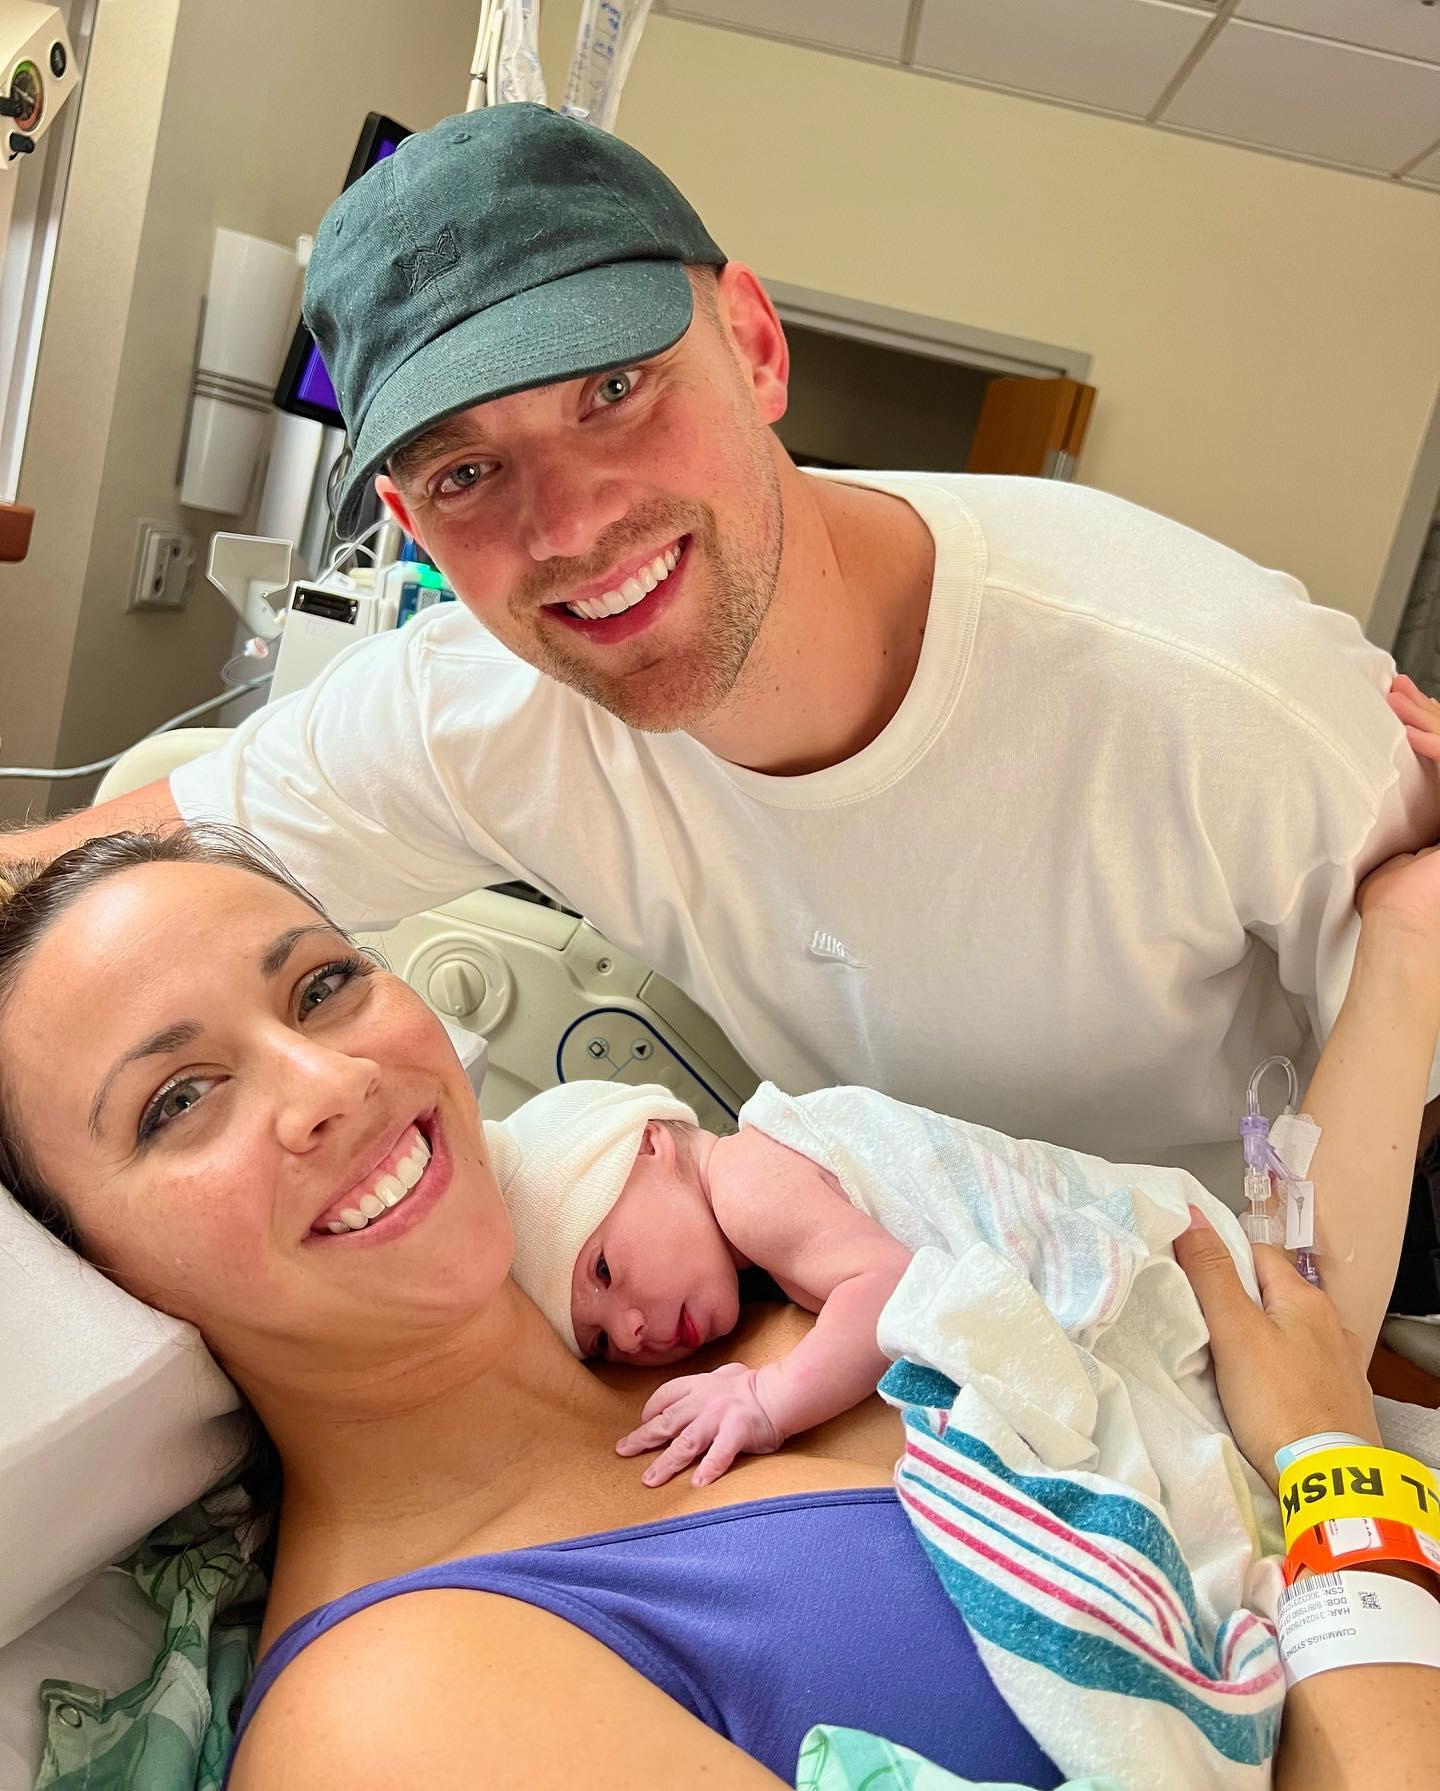 Sydney Cummings and Dustin Houdyshell welcome their first son, Ari Drew Houdyshell, on June 22, 2022 